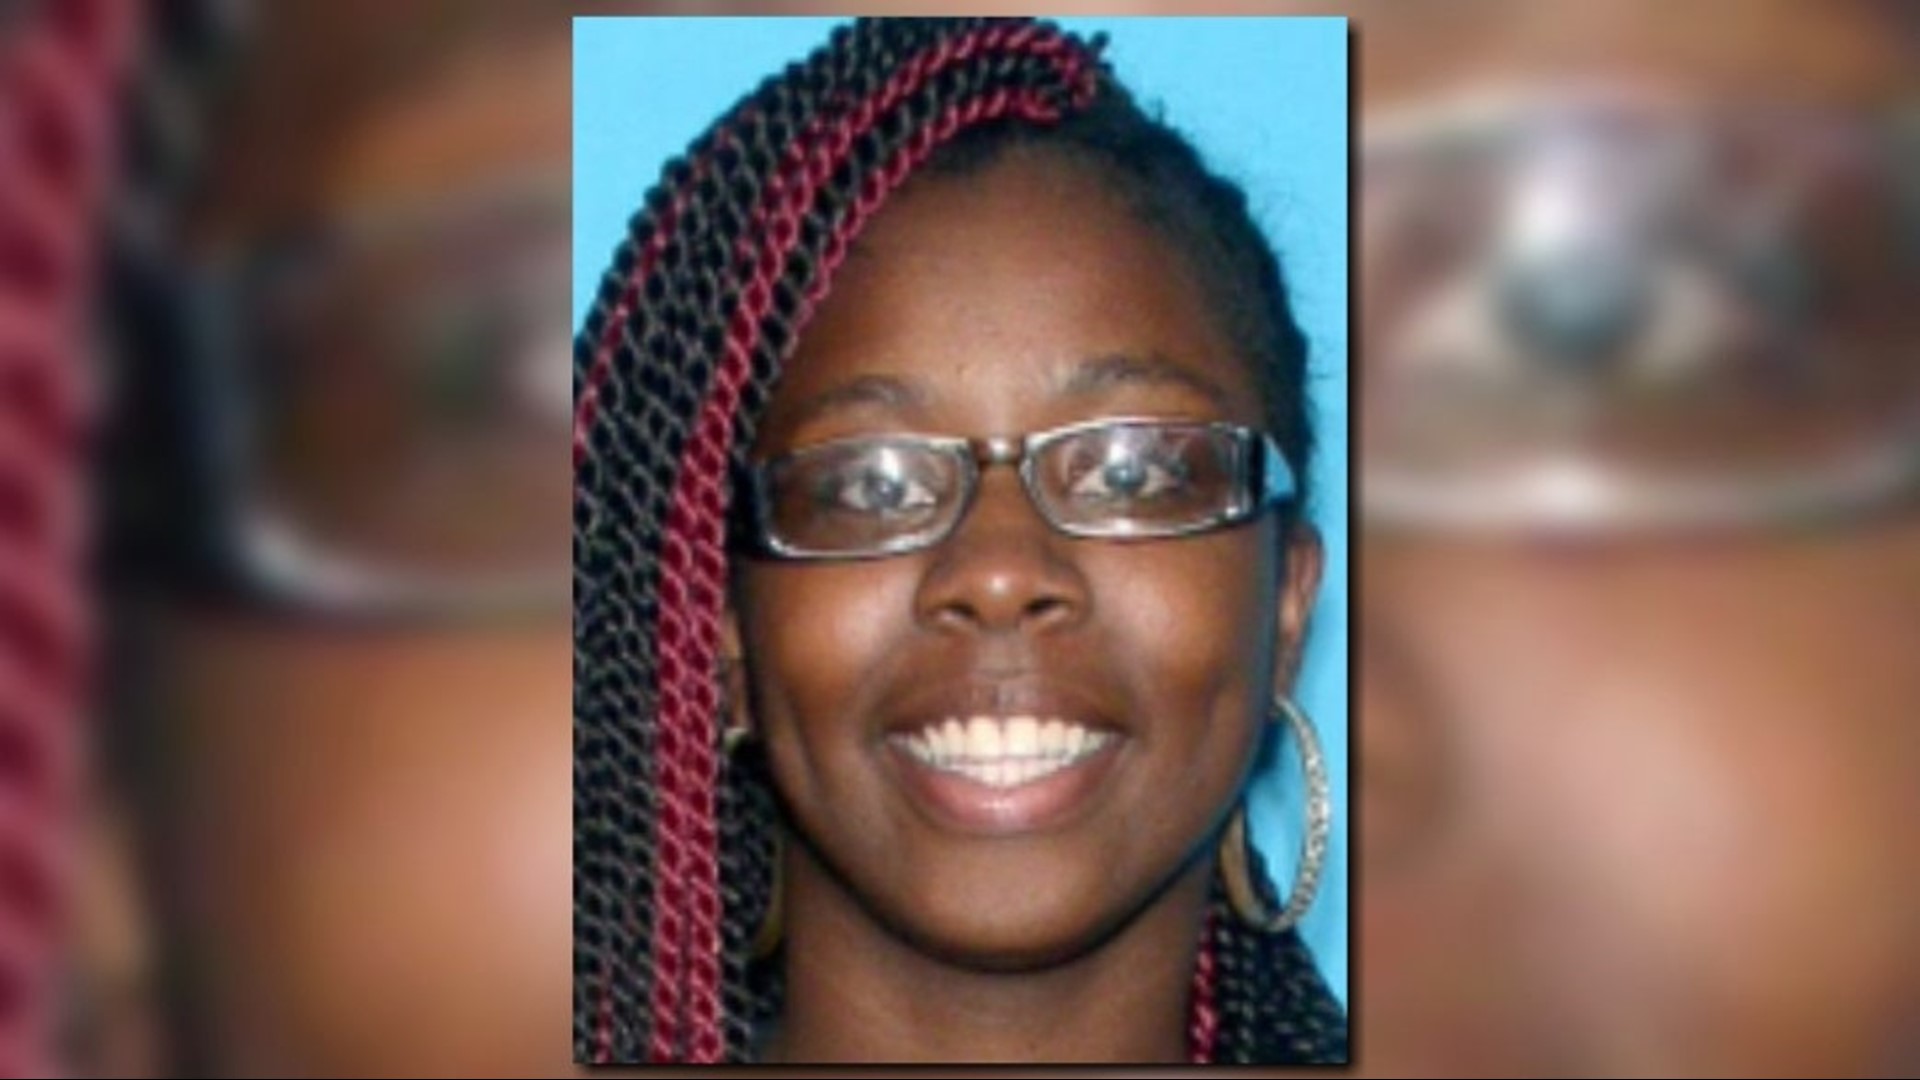 missing-child-alert-issued-for-17-year-old-sebring-girl-who-might-be-in